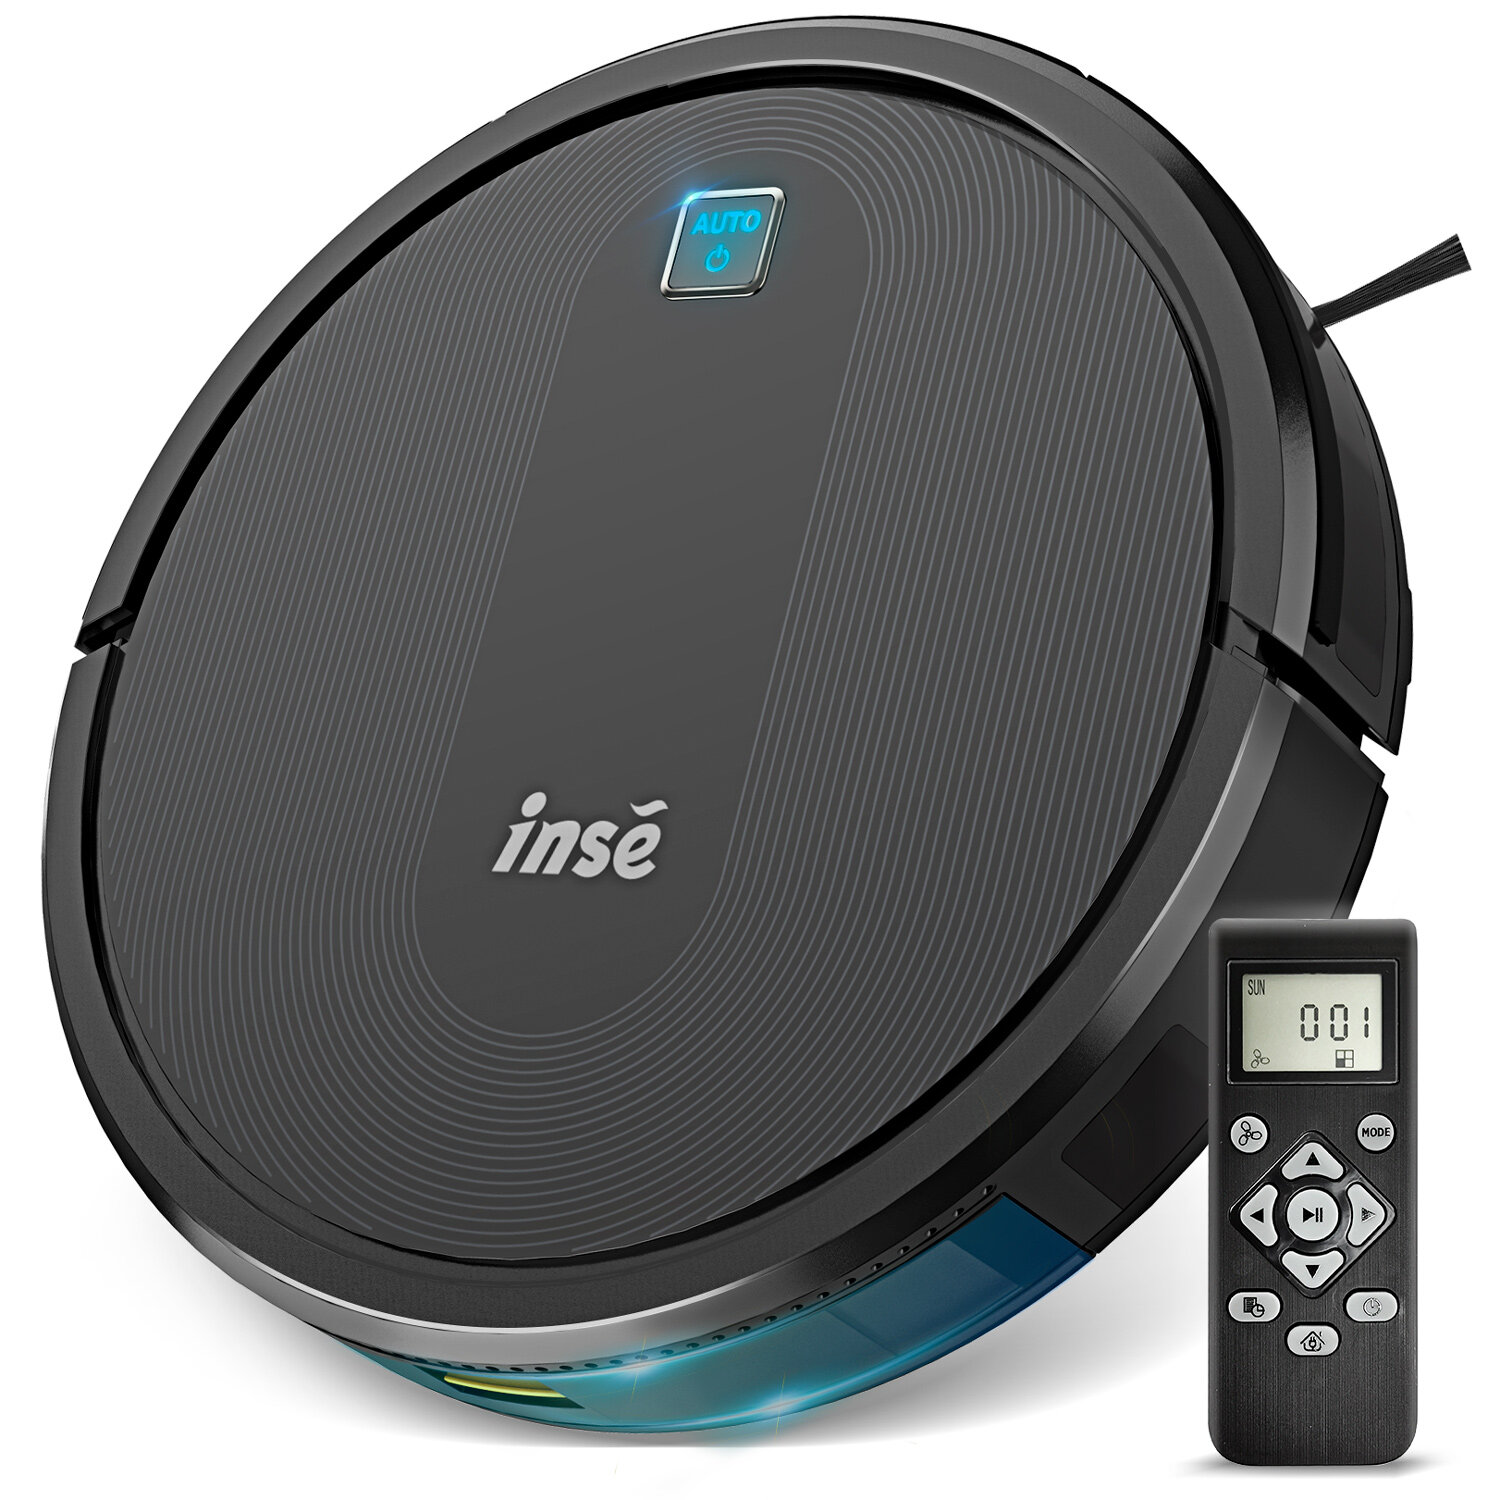 Image of INSE E6 Robot Vacuum Cleaner 2200Pa Strong Suction 2600mAh Battery Life 4 Cleaning Modes for Pet Hair Hard Floors Carp